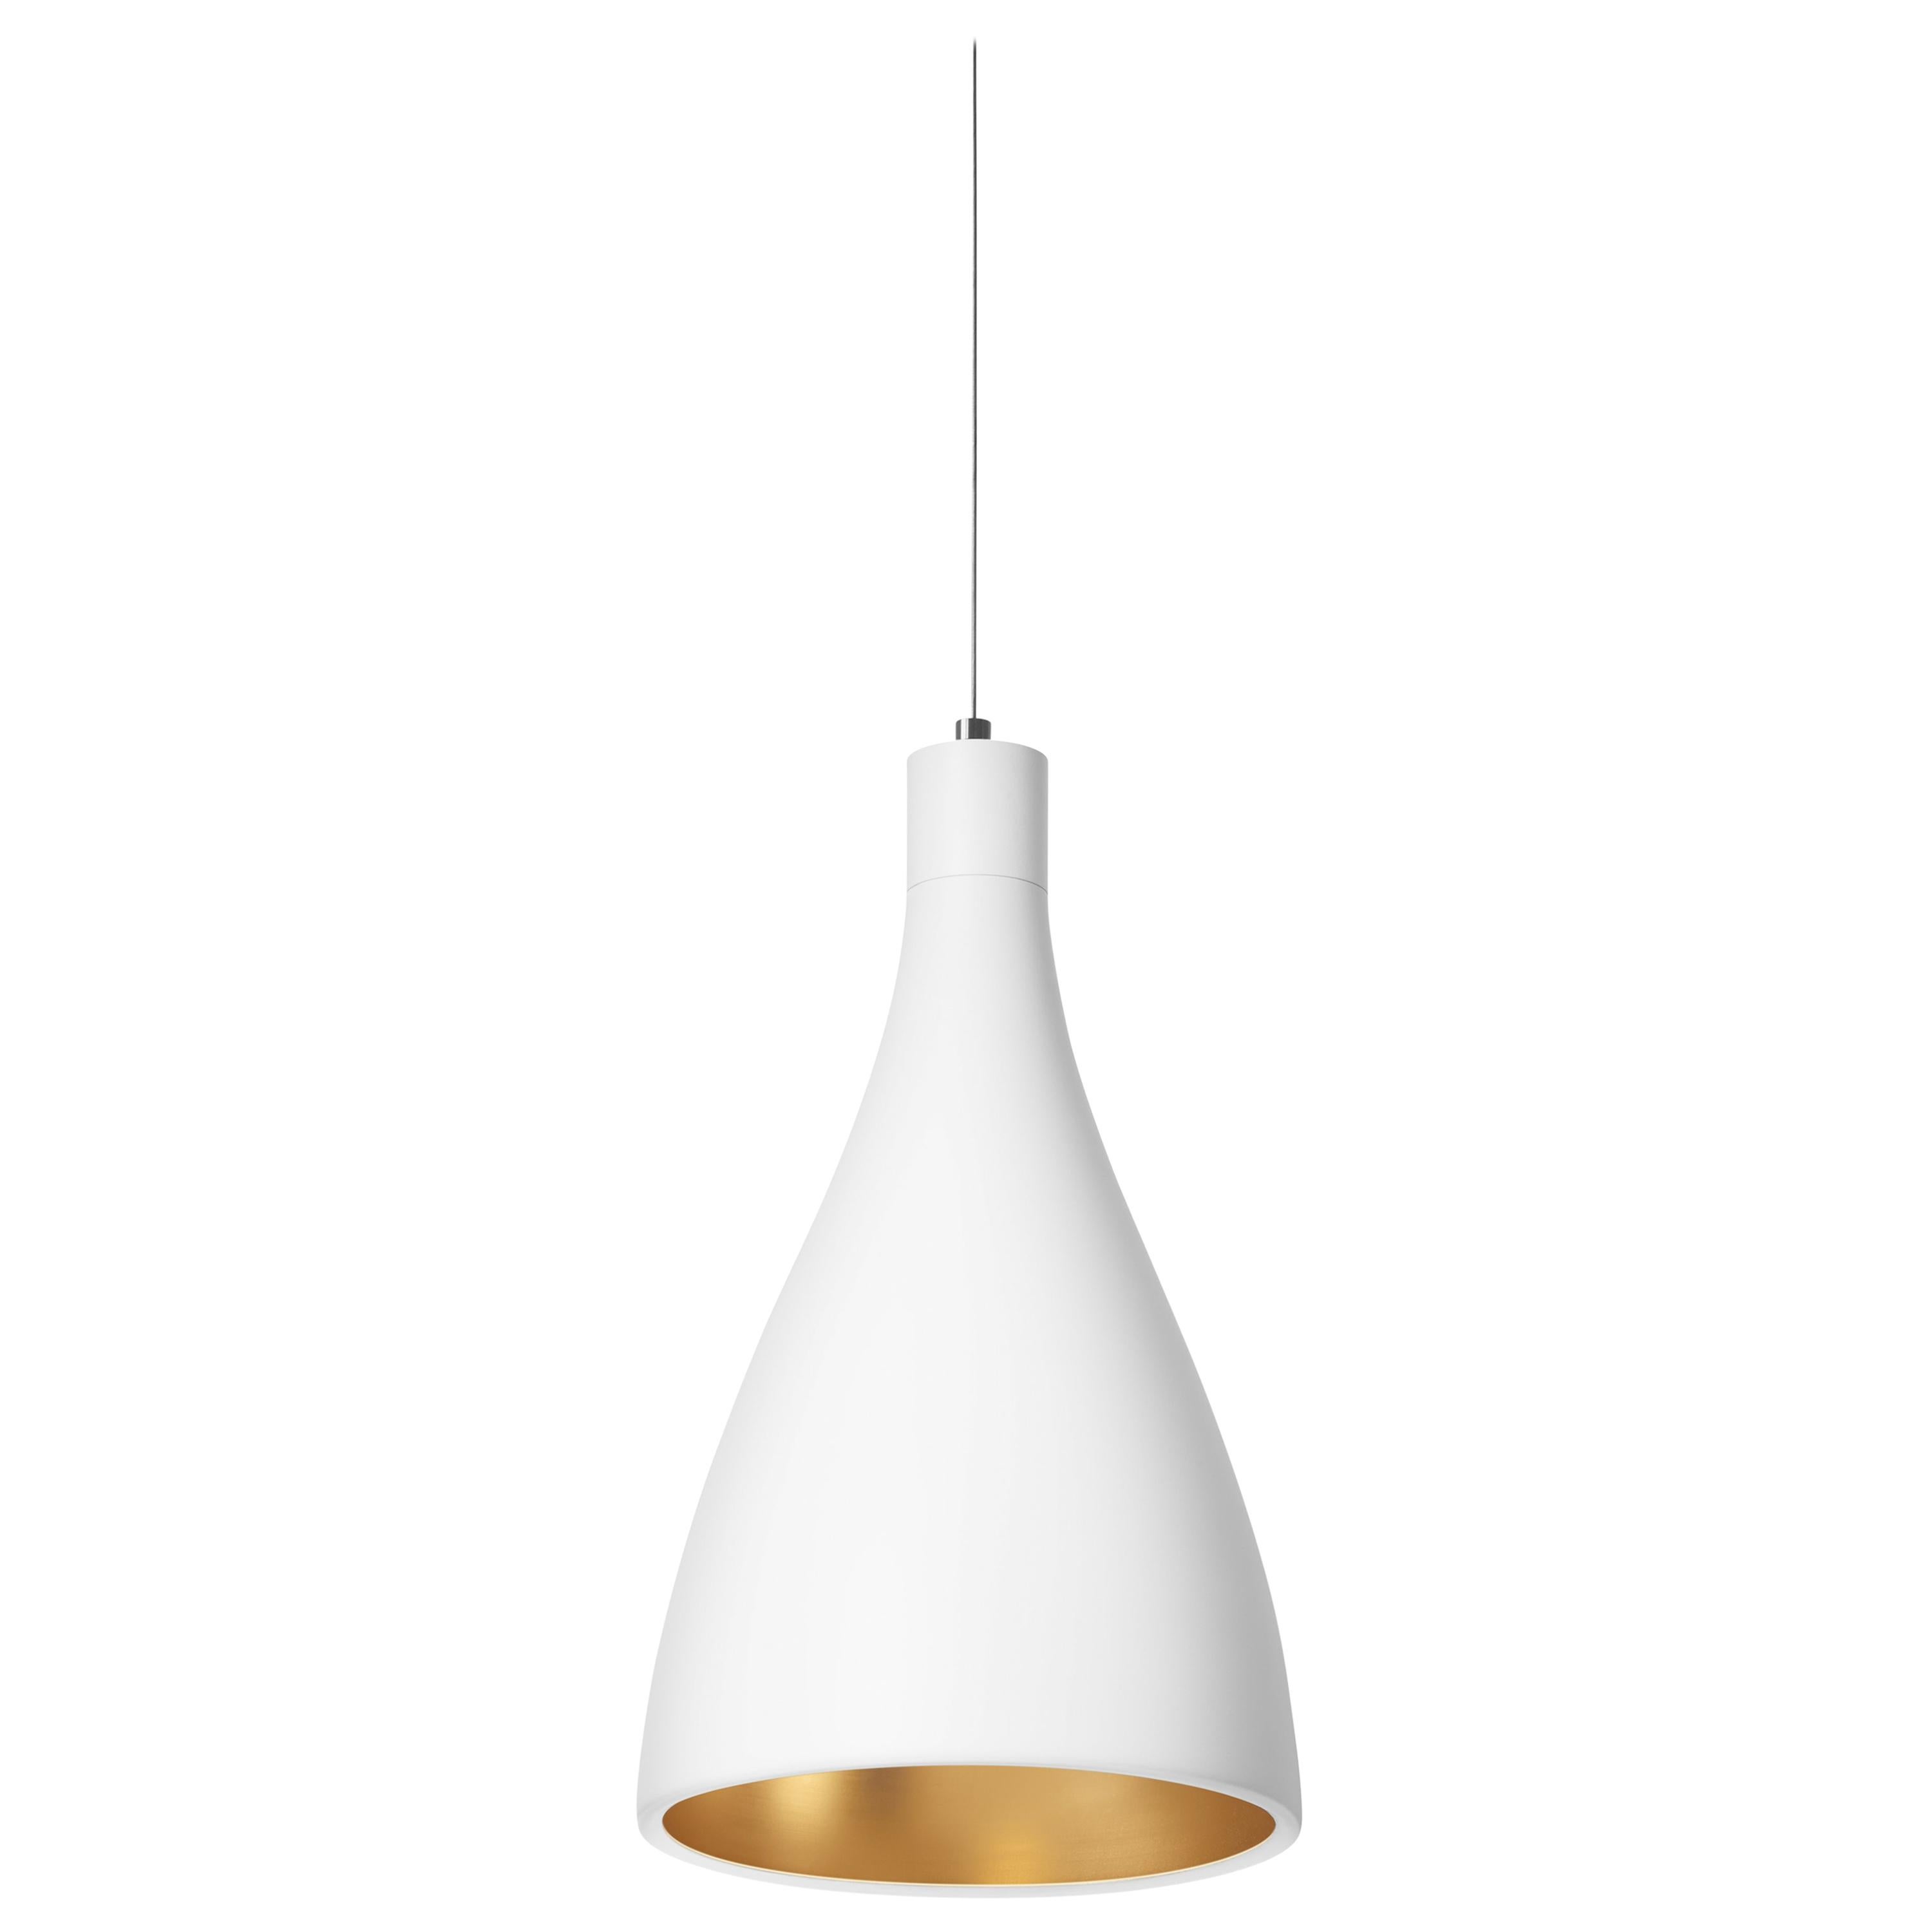 Narrow Swell String Pendant Light in White and Brass by Pablo Designs For Sale